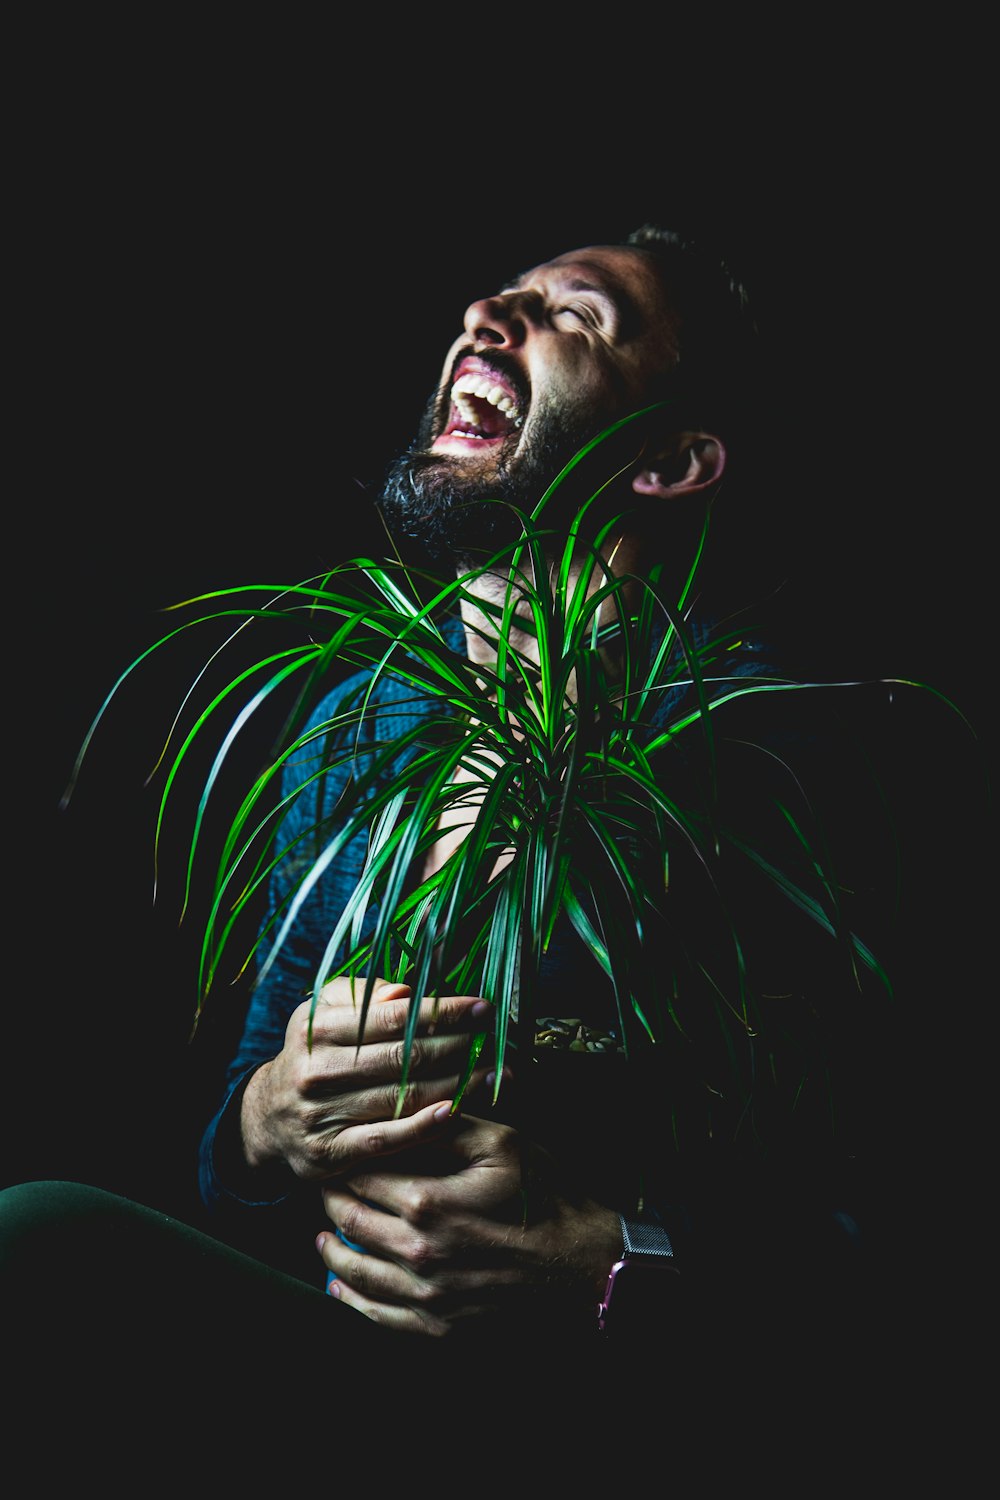 man holding green leafed plants